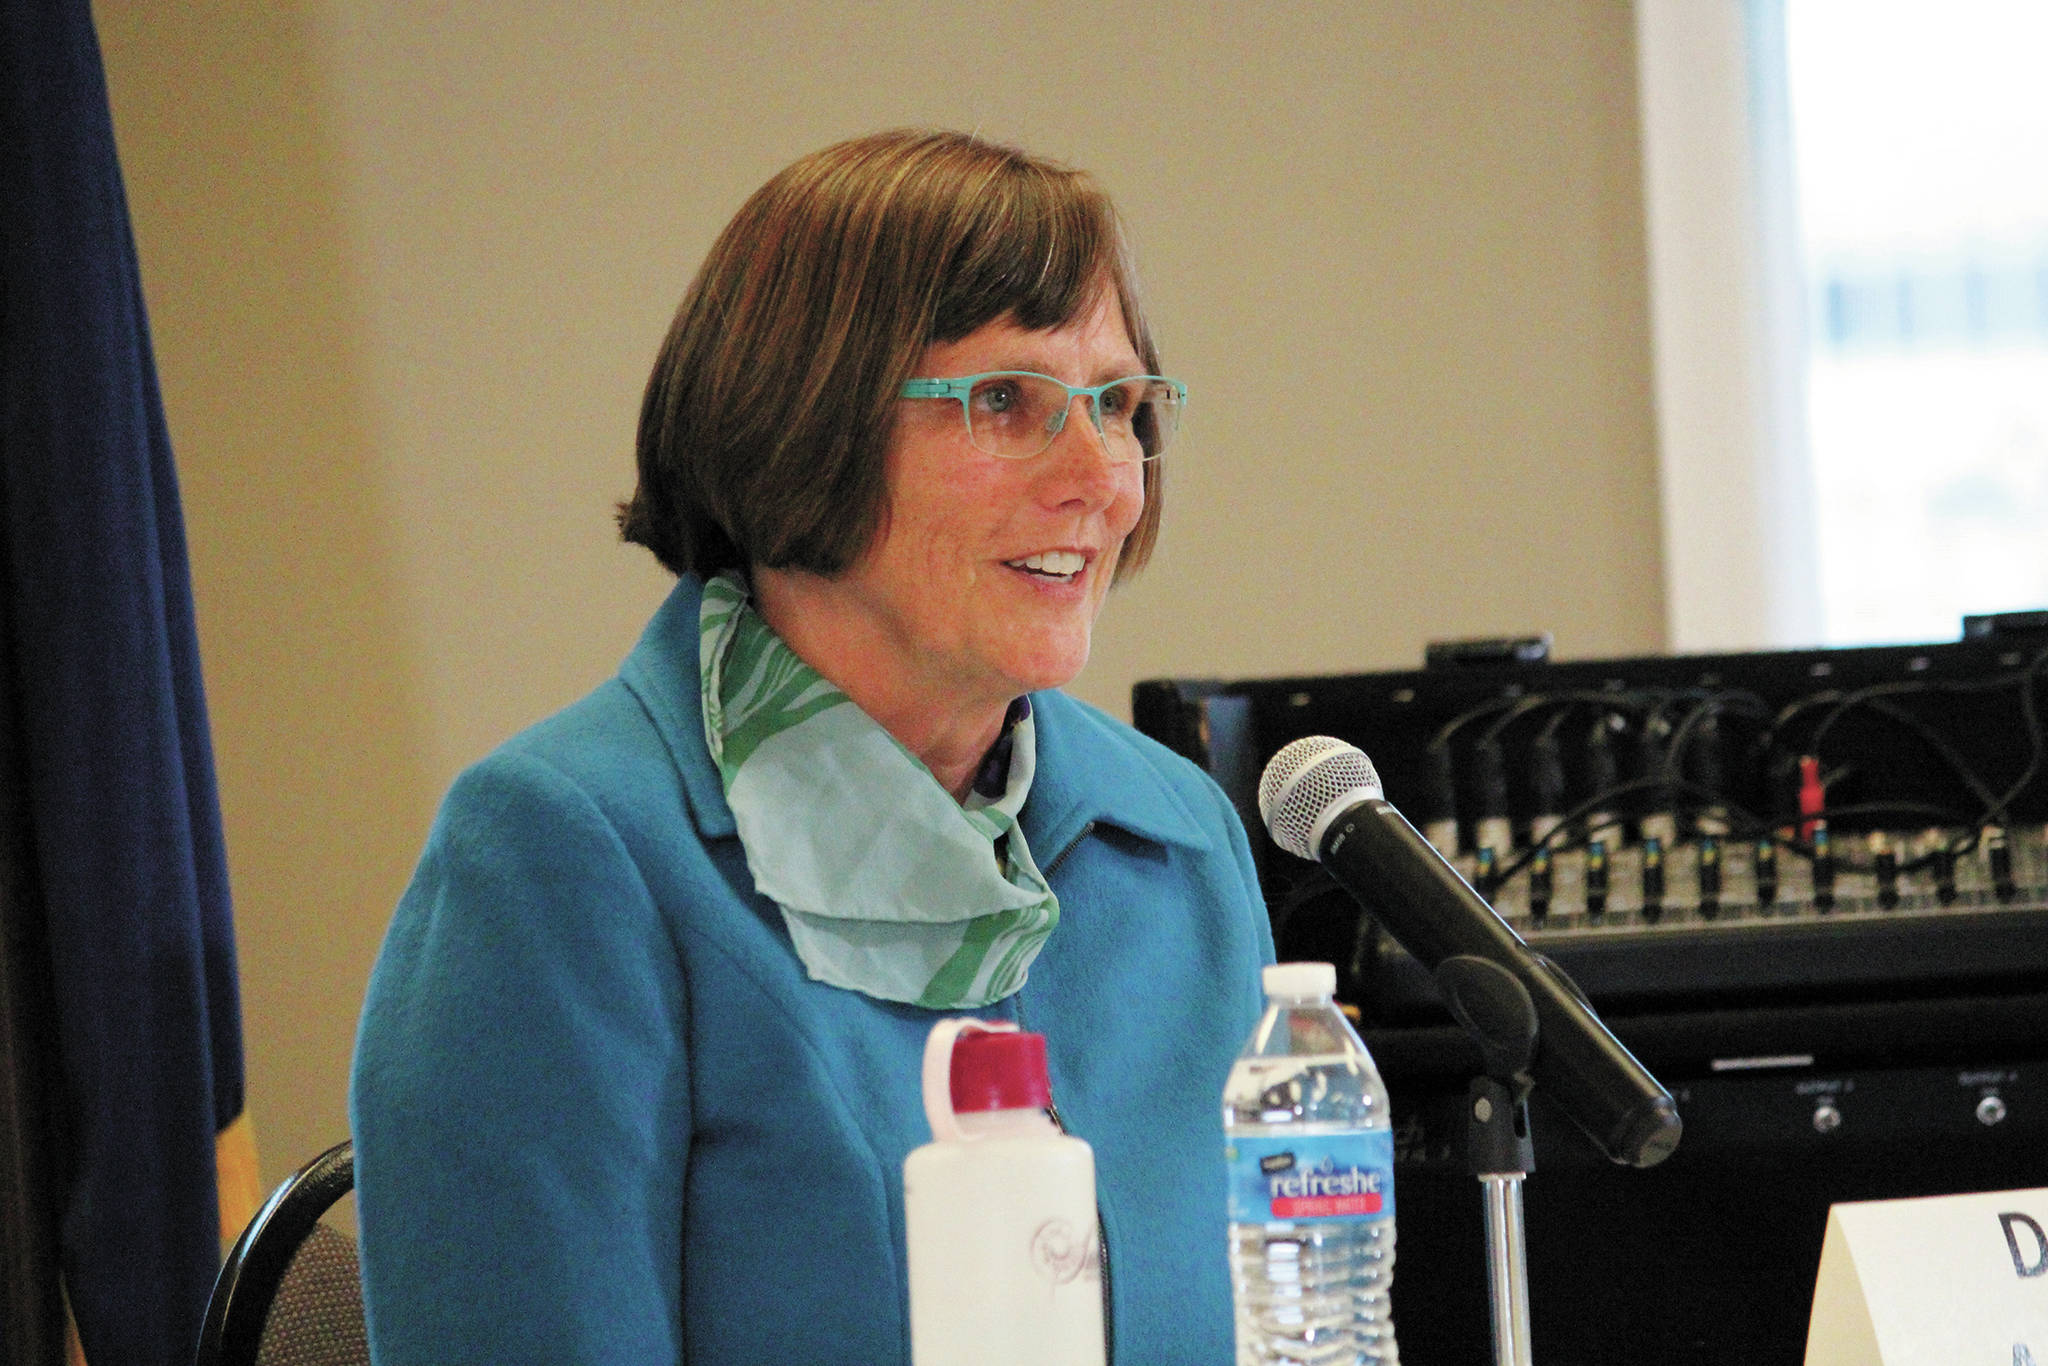 Homer City Council member Donna Aderhold, who is running for Homer mayor in the Oct. 6 election, speaks during a candidate forum held Thursday, Sept. 24, 2020 by the Homer Chamber of Commerce & Visitor Center at Land’s End Resort in Homer, Alaska. (Photo by Megan Pacer/Homer News)